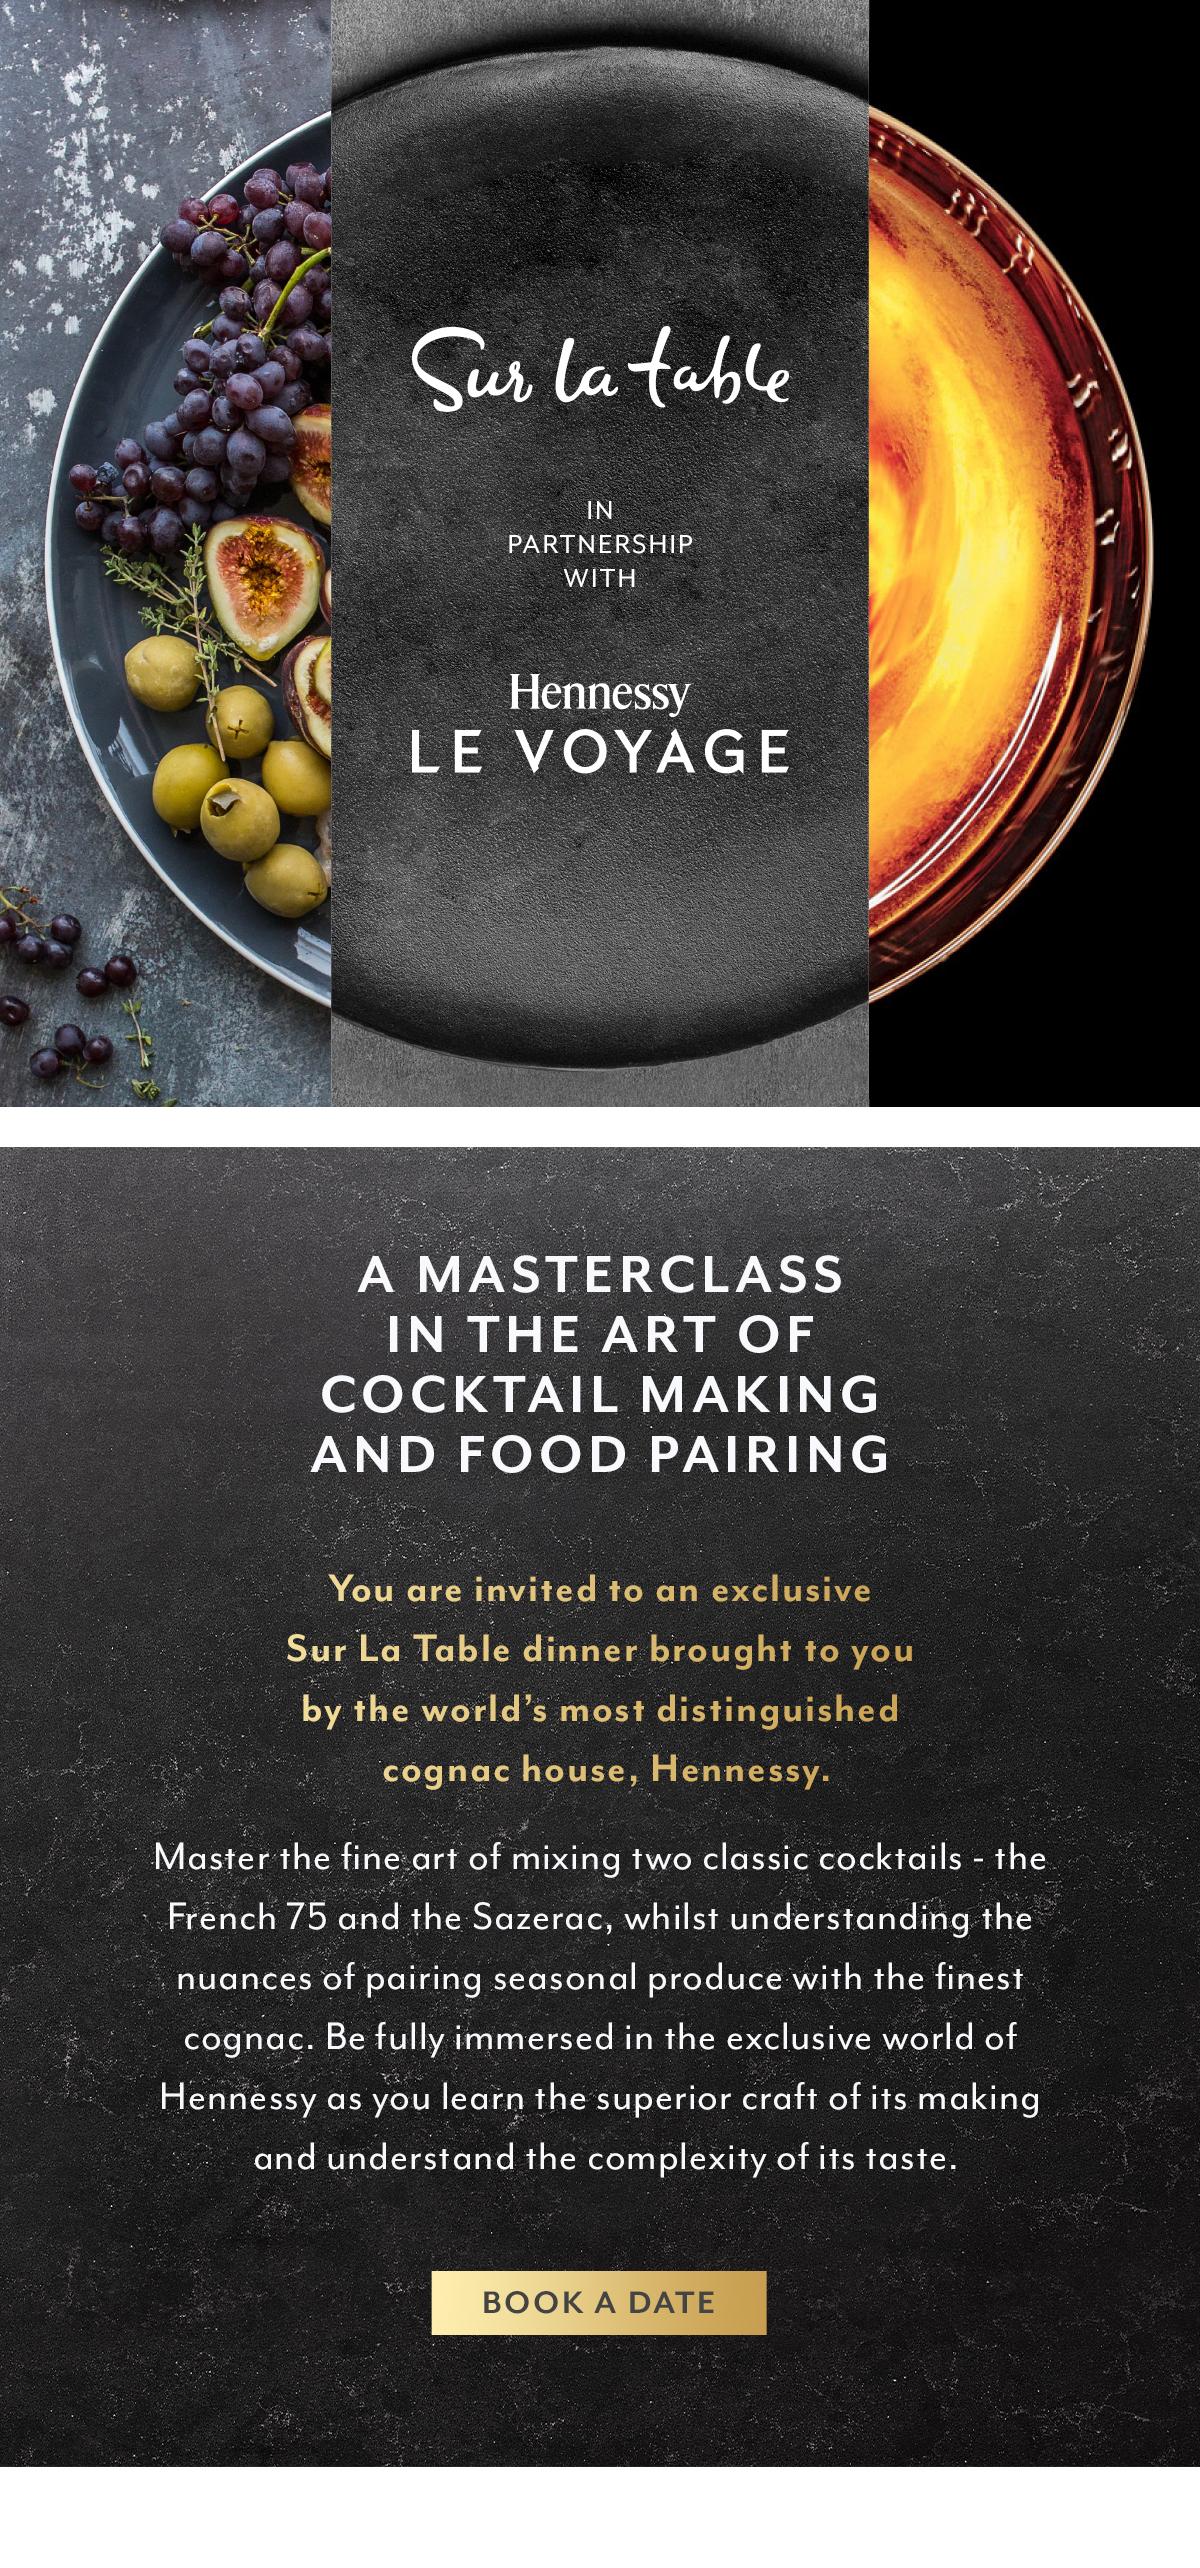 Hennessy Le Voyage with Sur La Table (King of Prussia)